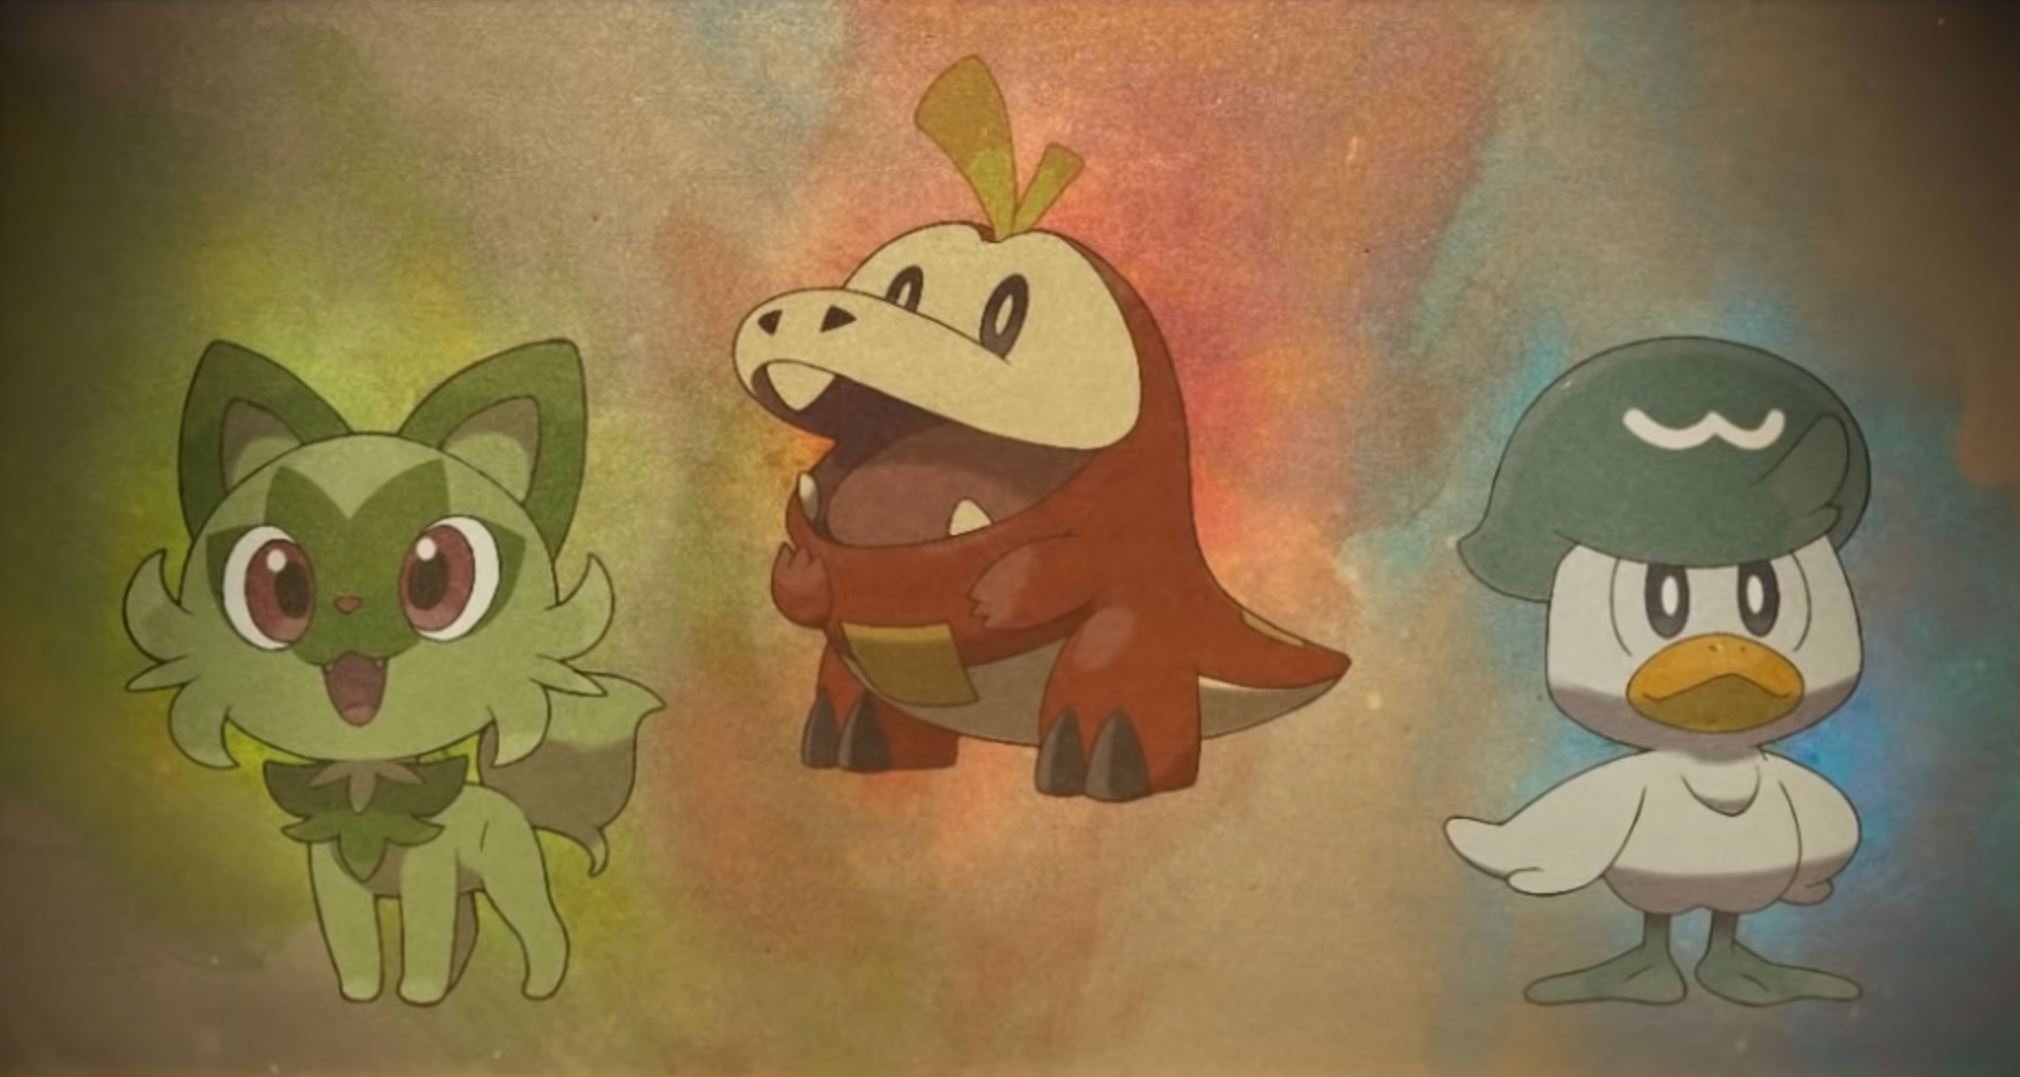 Update: Pokemon X and Y Starters' Final Evolutions Revealed - The